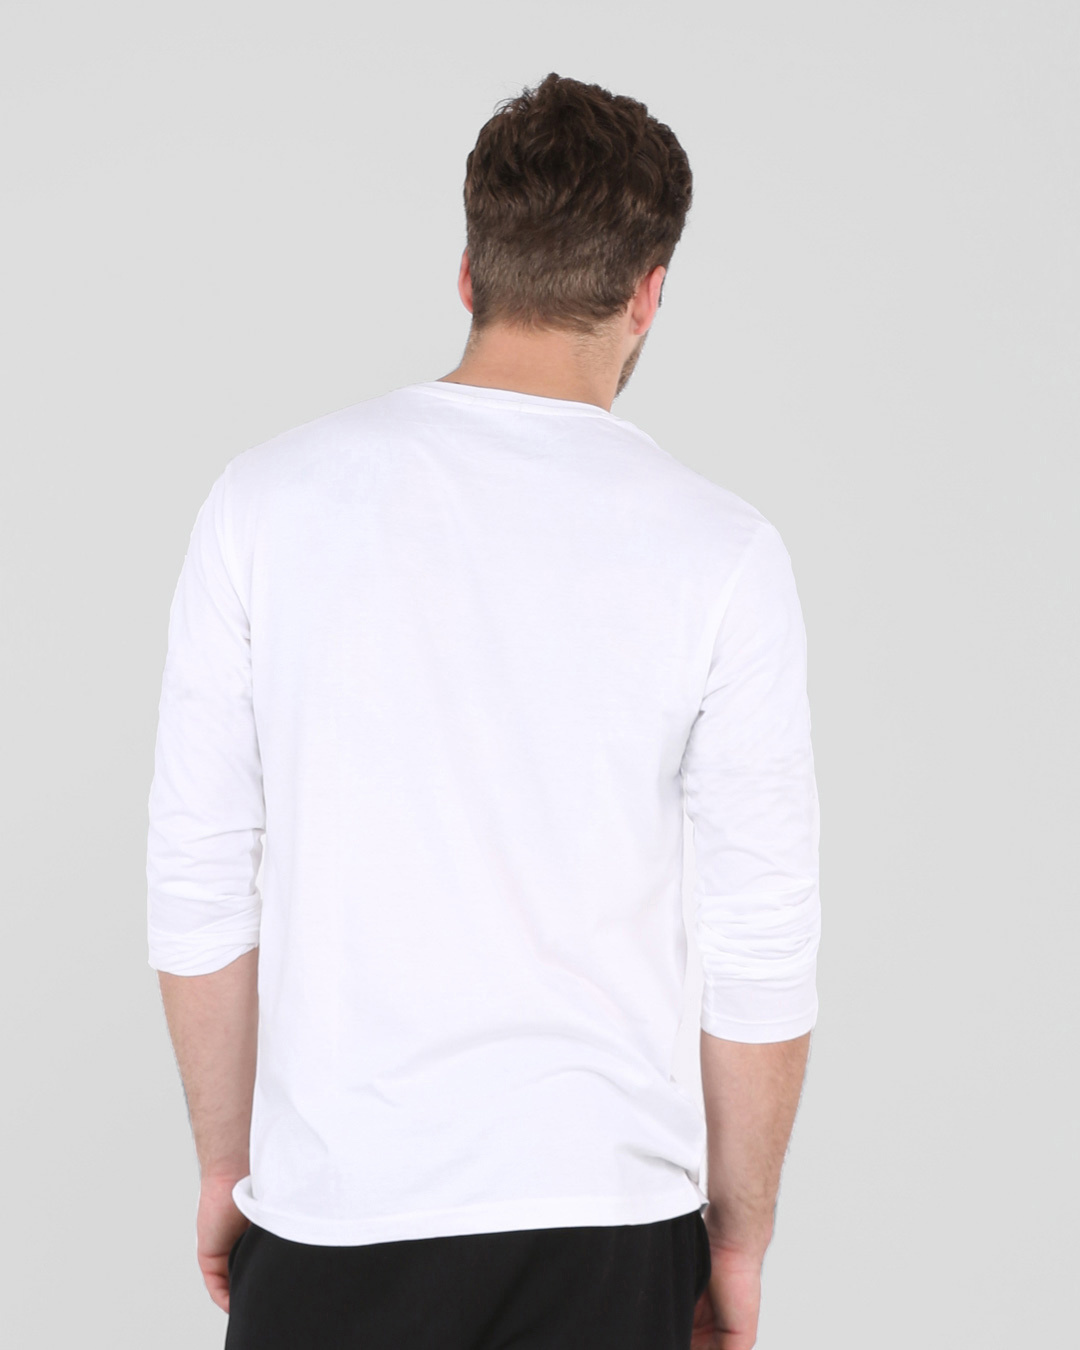 Shop Escape to outdoors Full Sleeve T-Shirt White-Back